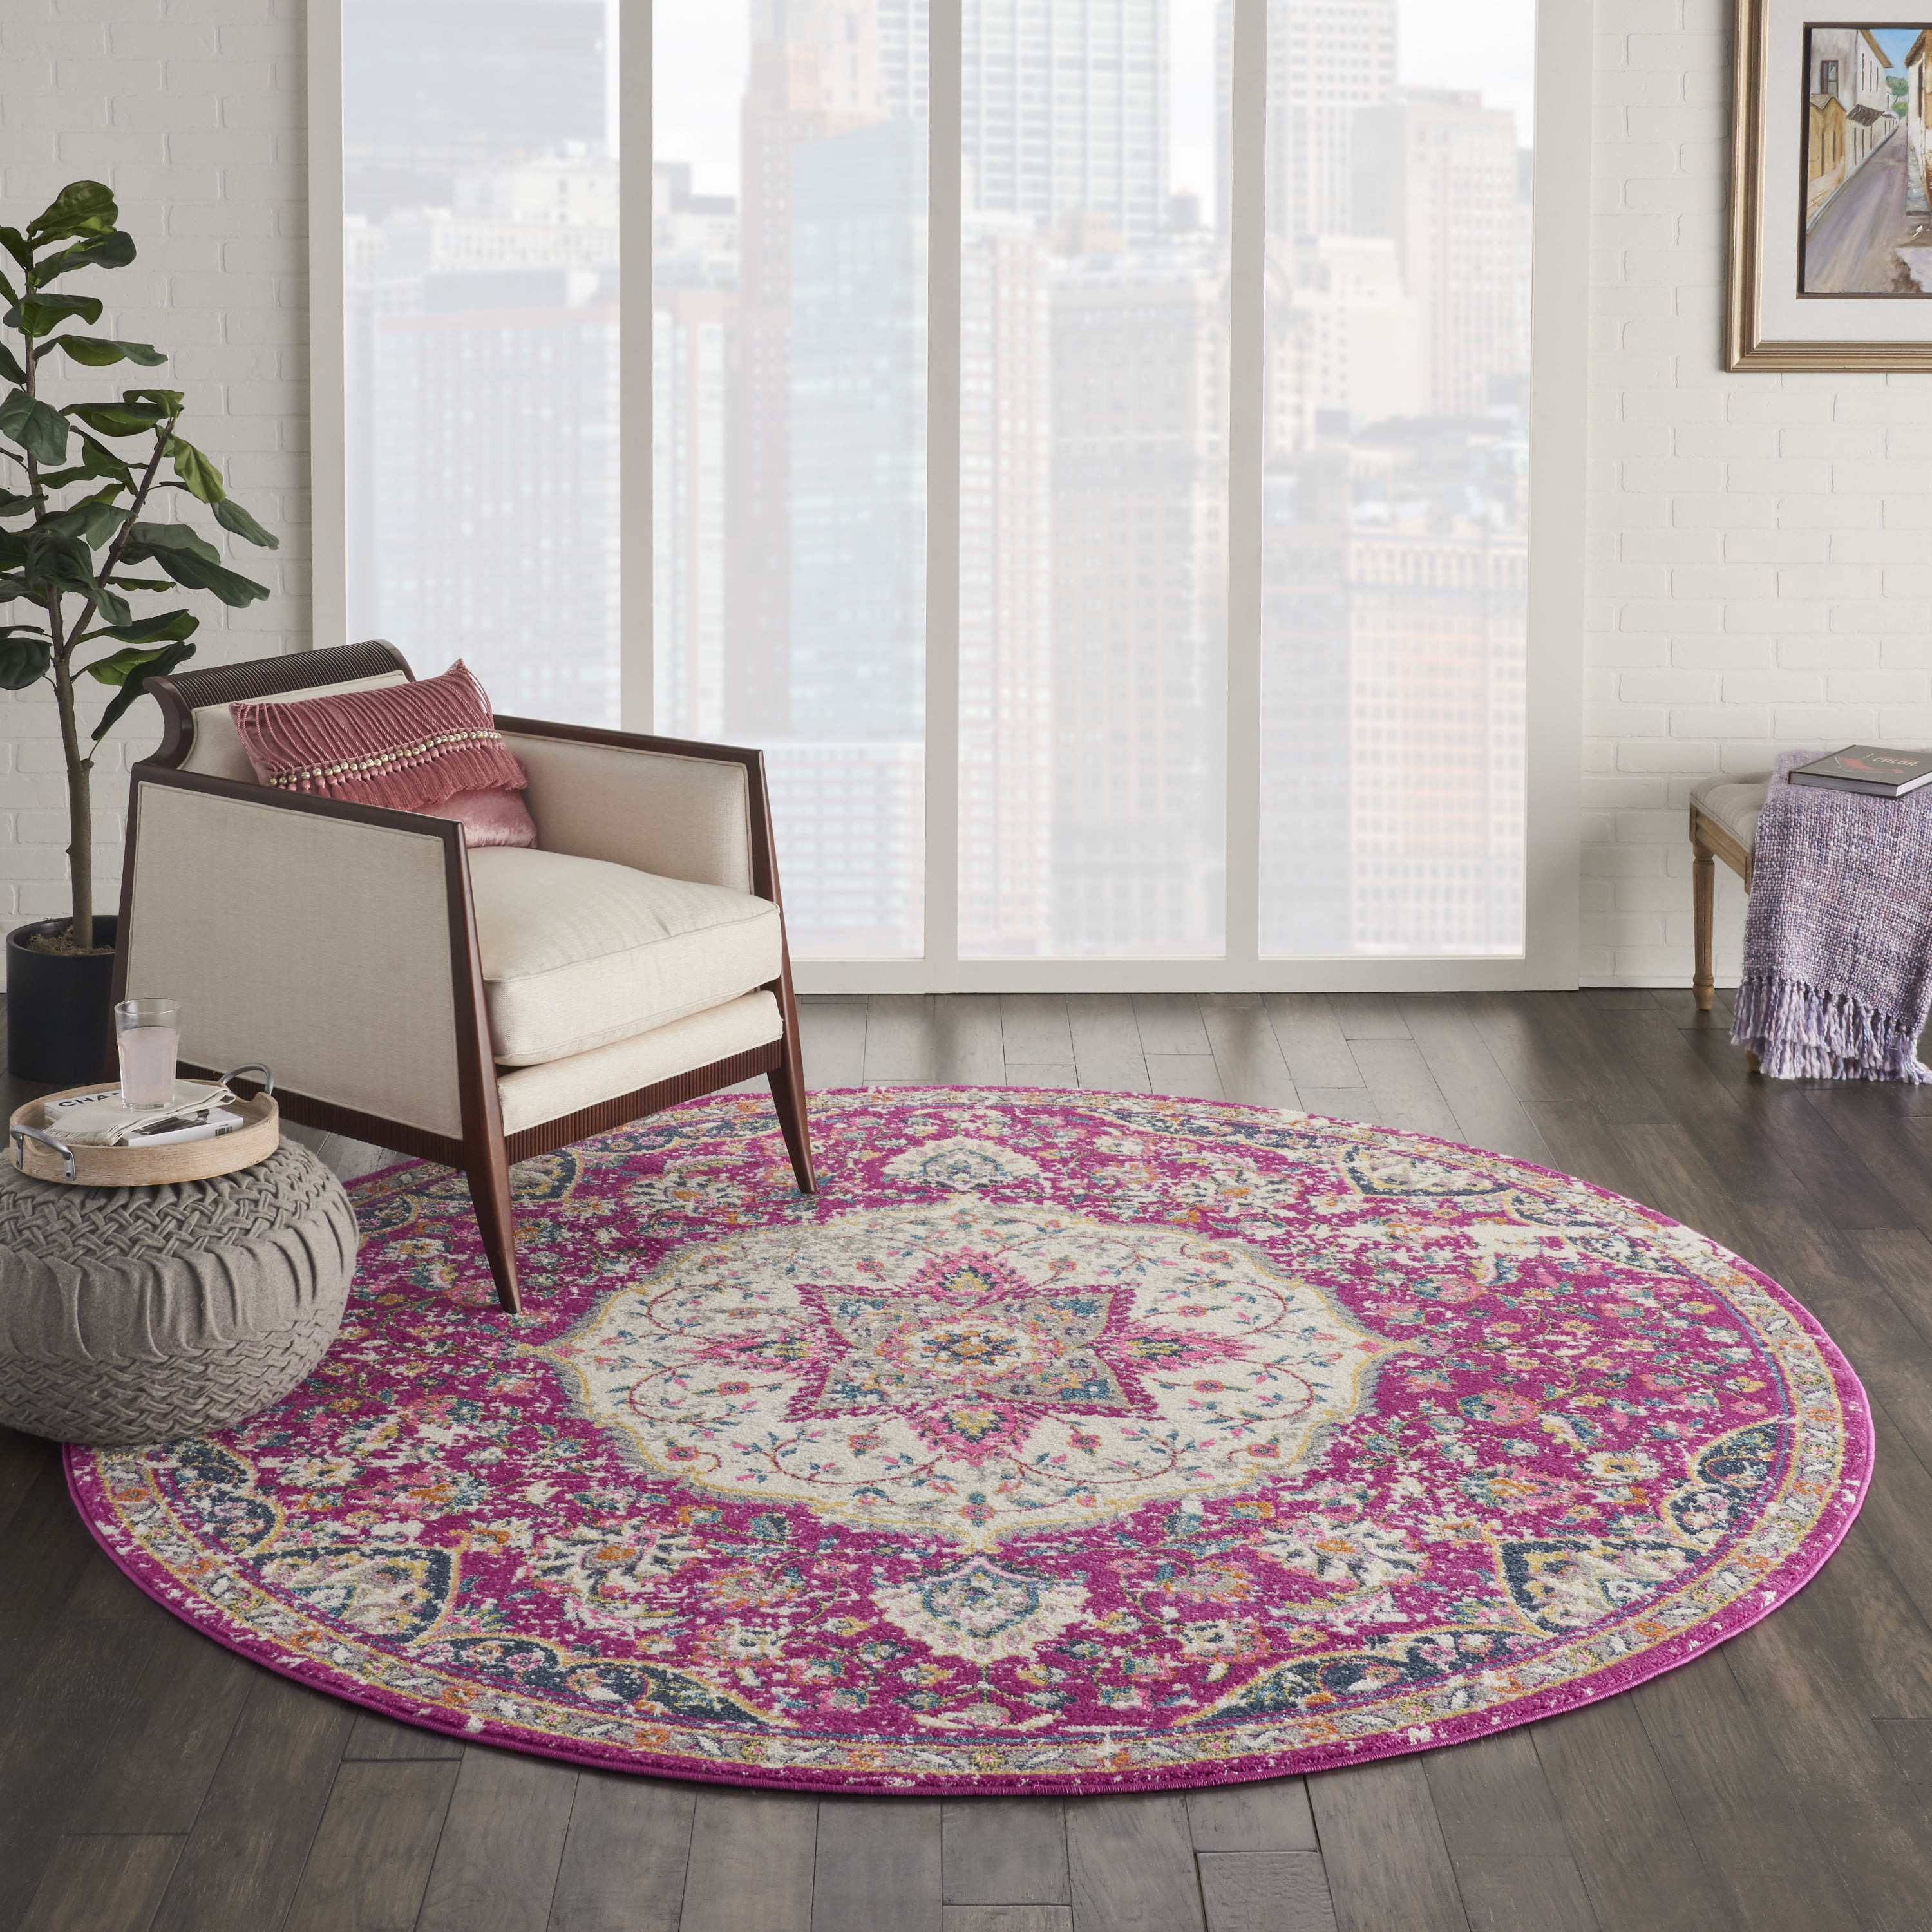 Nourison Passion Transitional Bohemian Light Grey/Pink 8' x ROUND Area Rug, 8' Round 